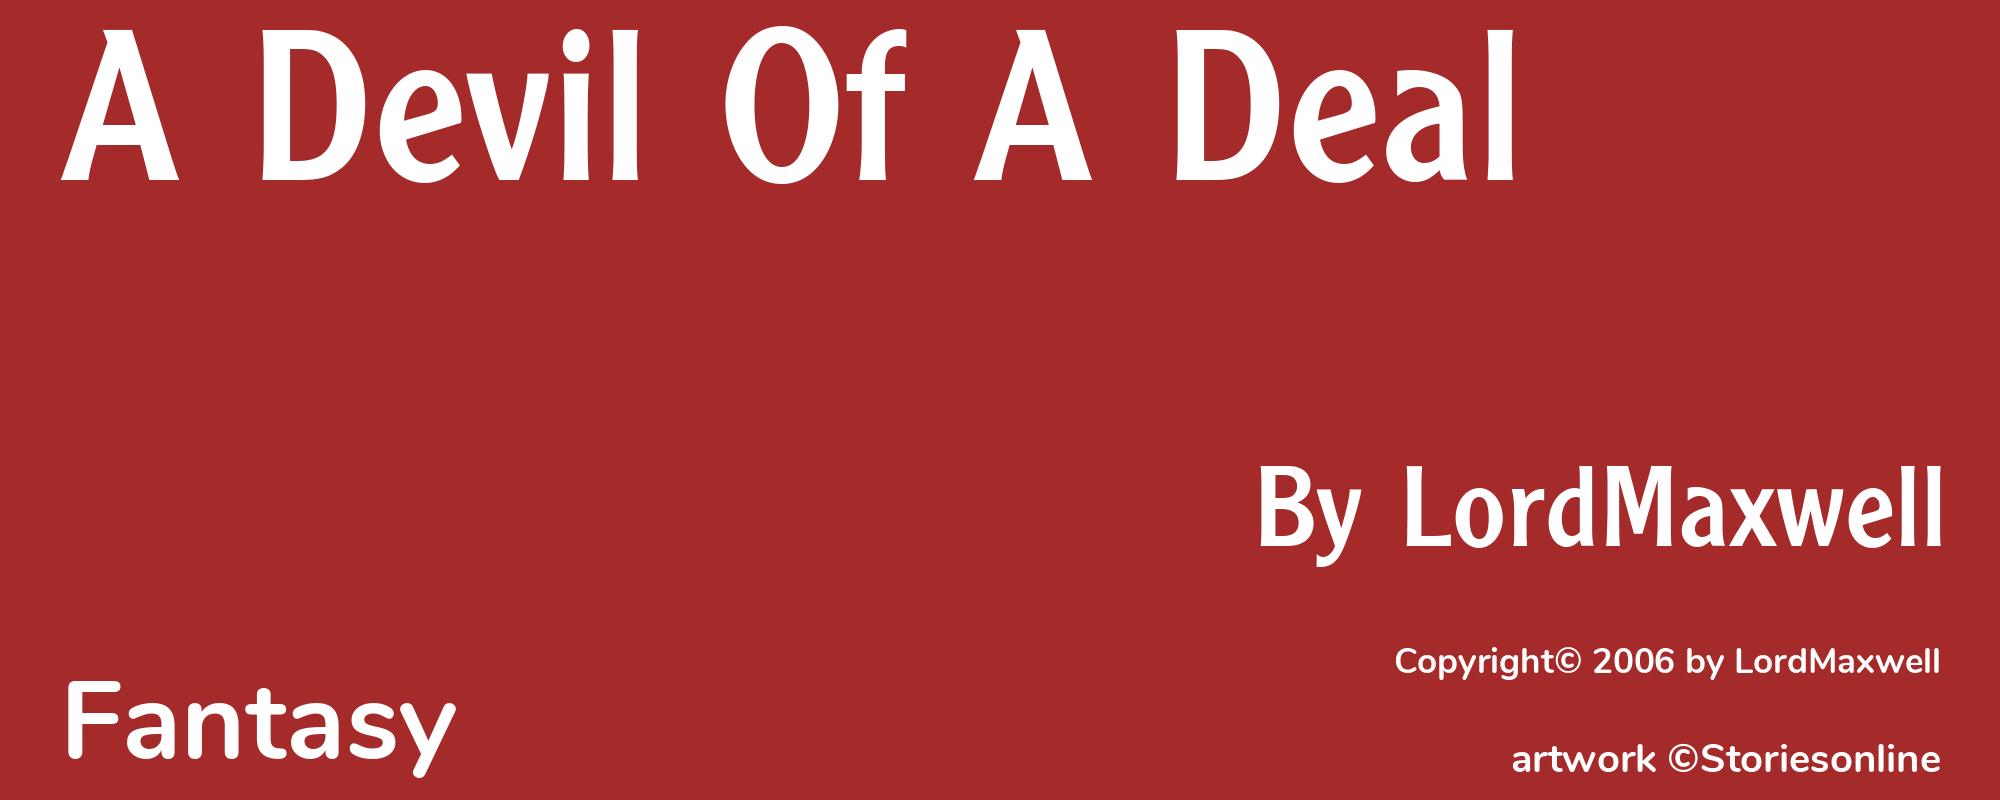 A Devil Of A Deal - Cover